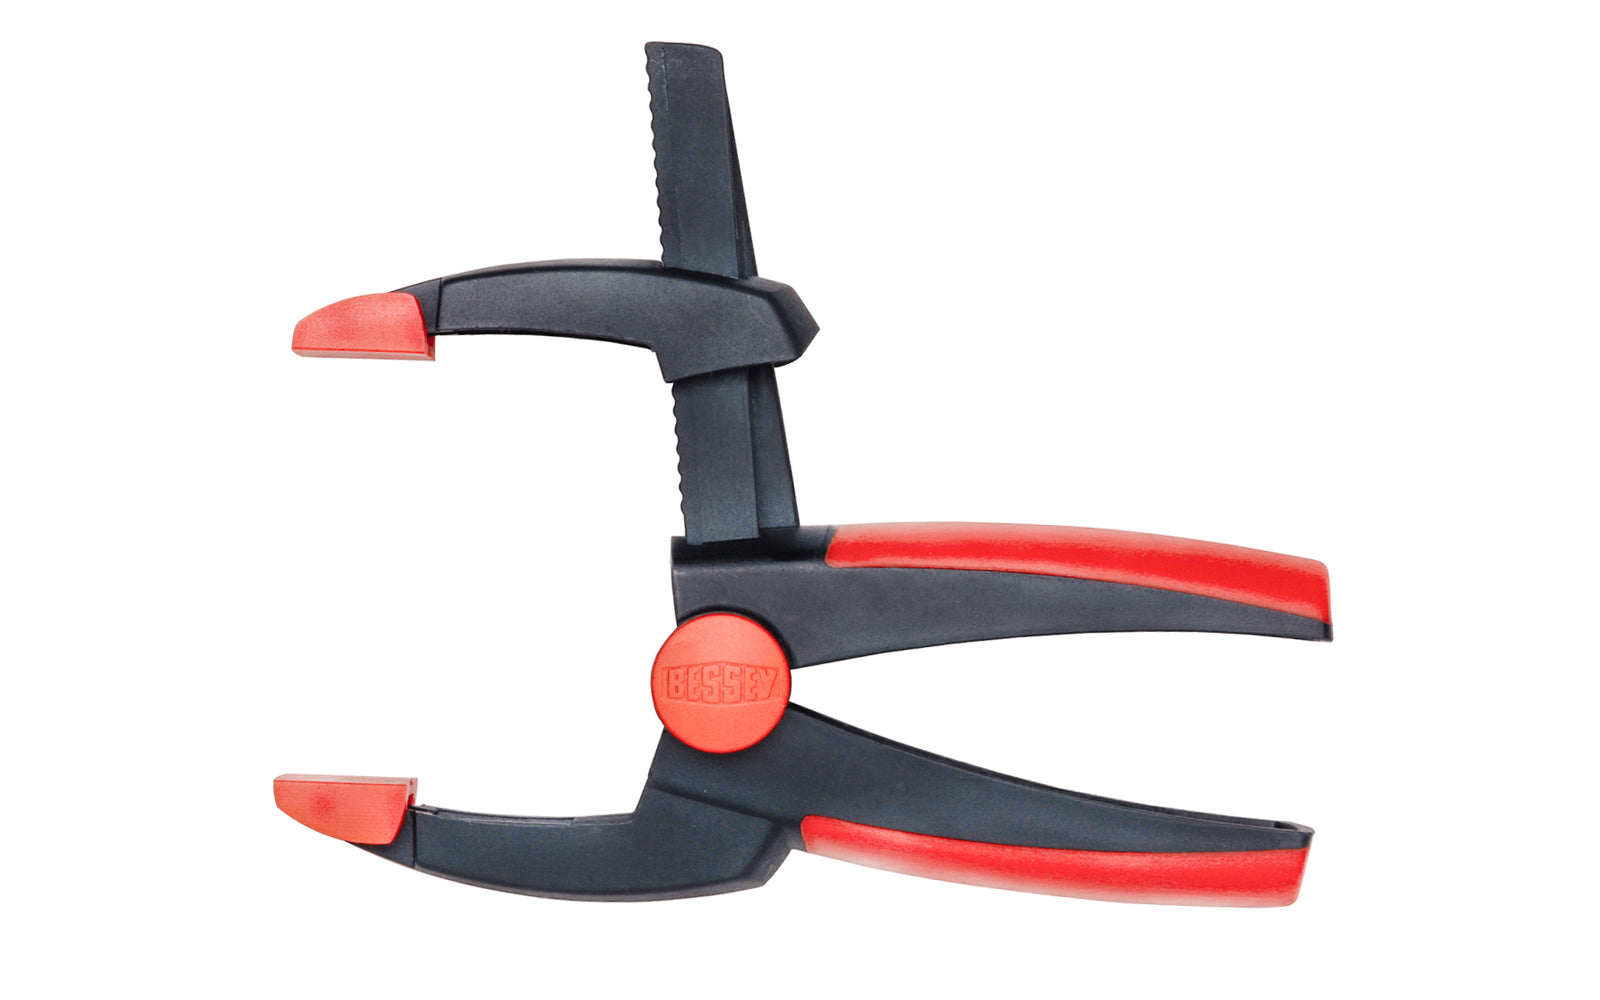 Bessey Clamps Model No. XV5-170 - These variable spring clamps from Bessey can clamp on items and have 6-1/2